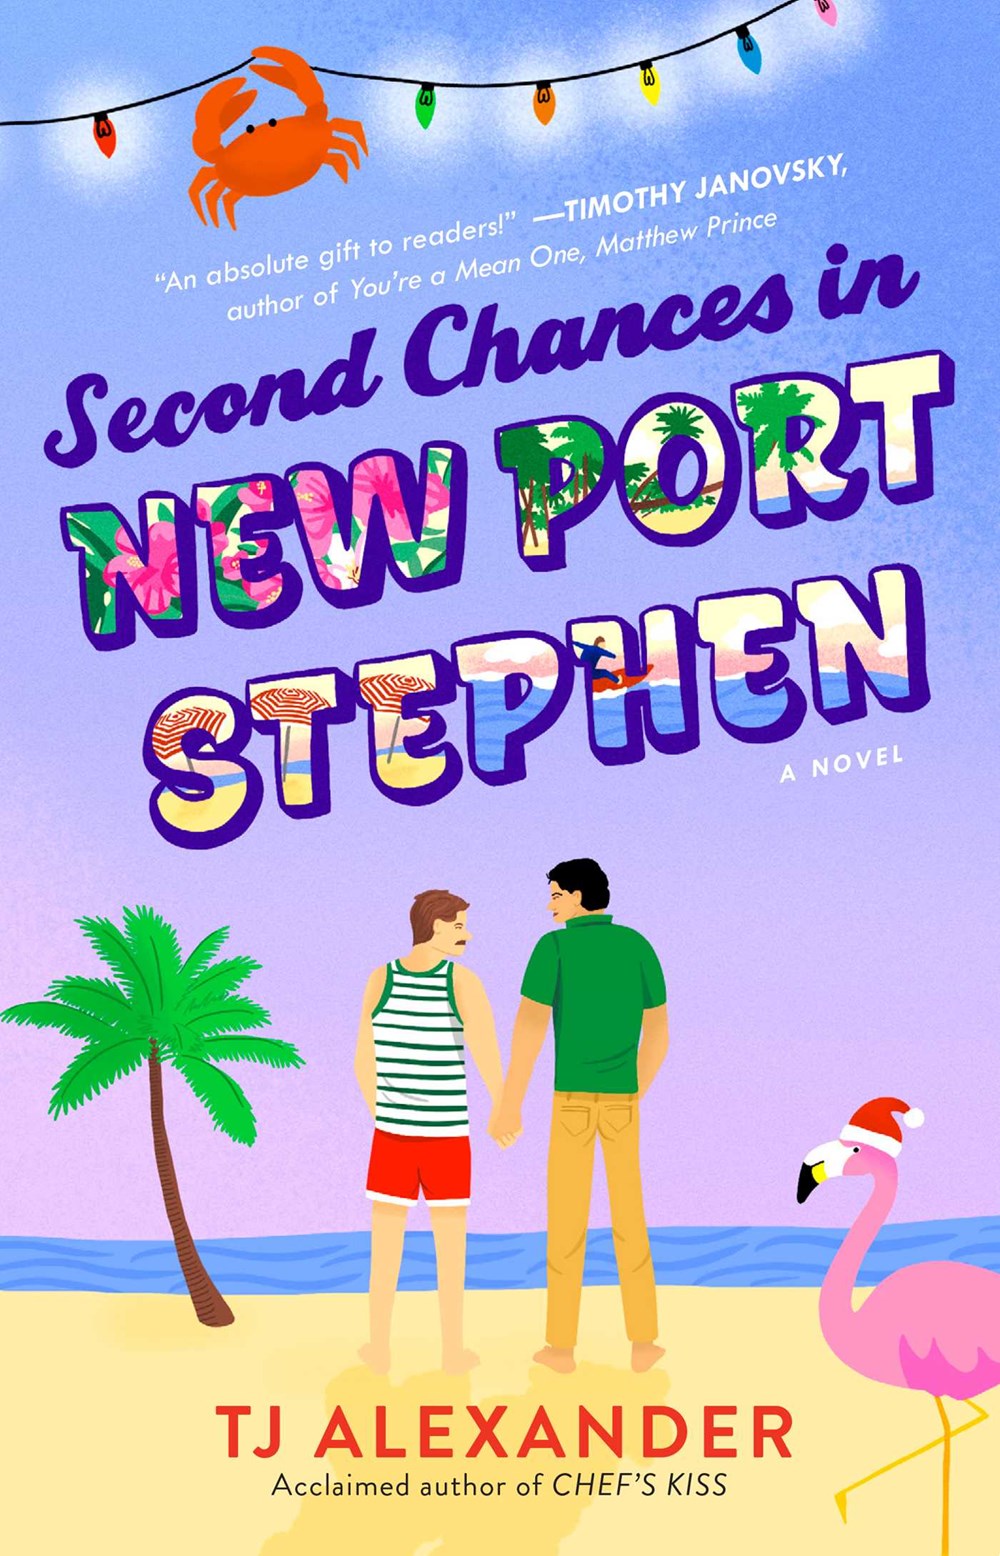 'Second Chances in New Port Stephen' by TJ Alexander | Romance Pick of the Month